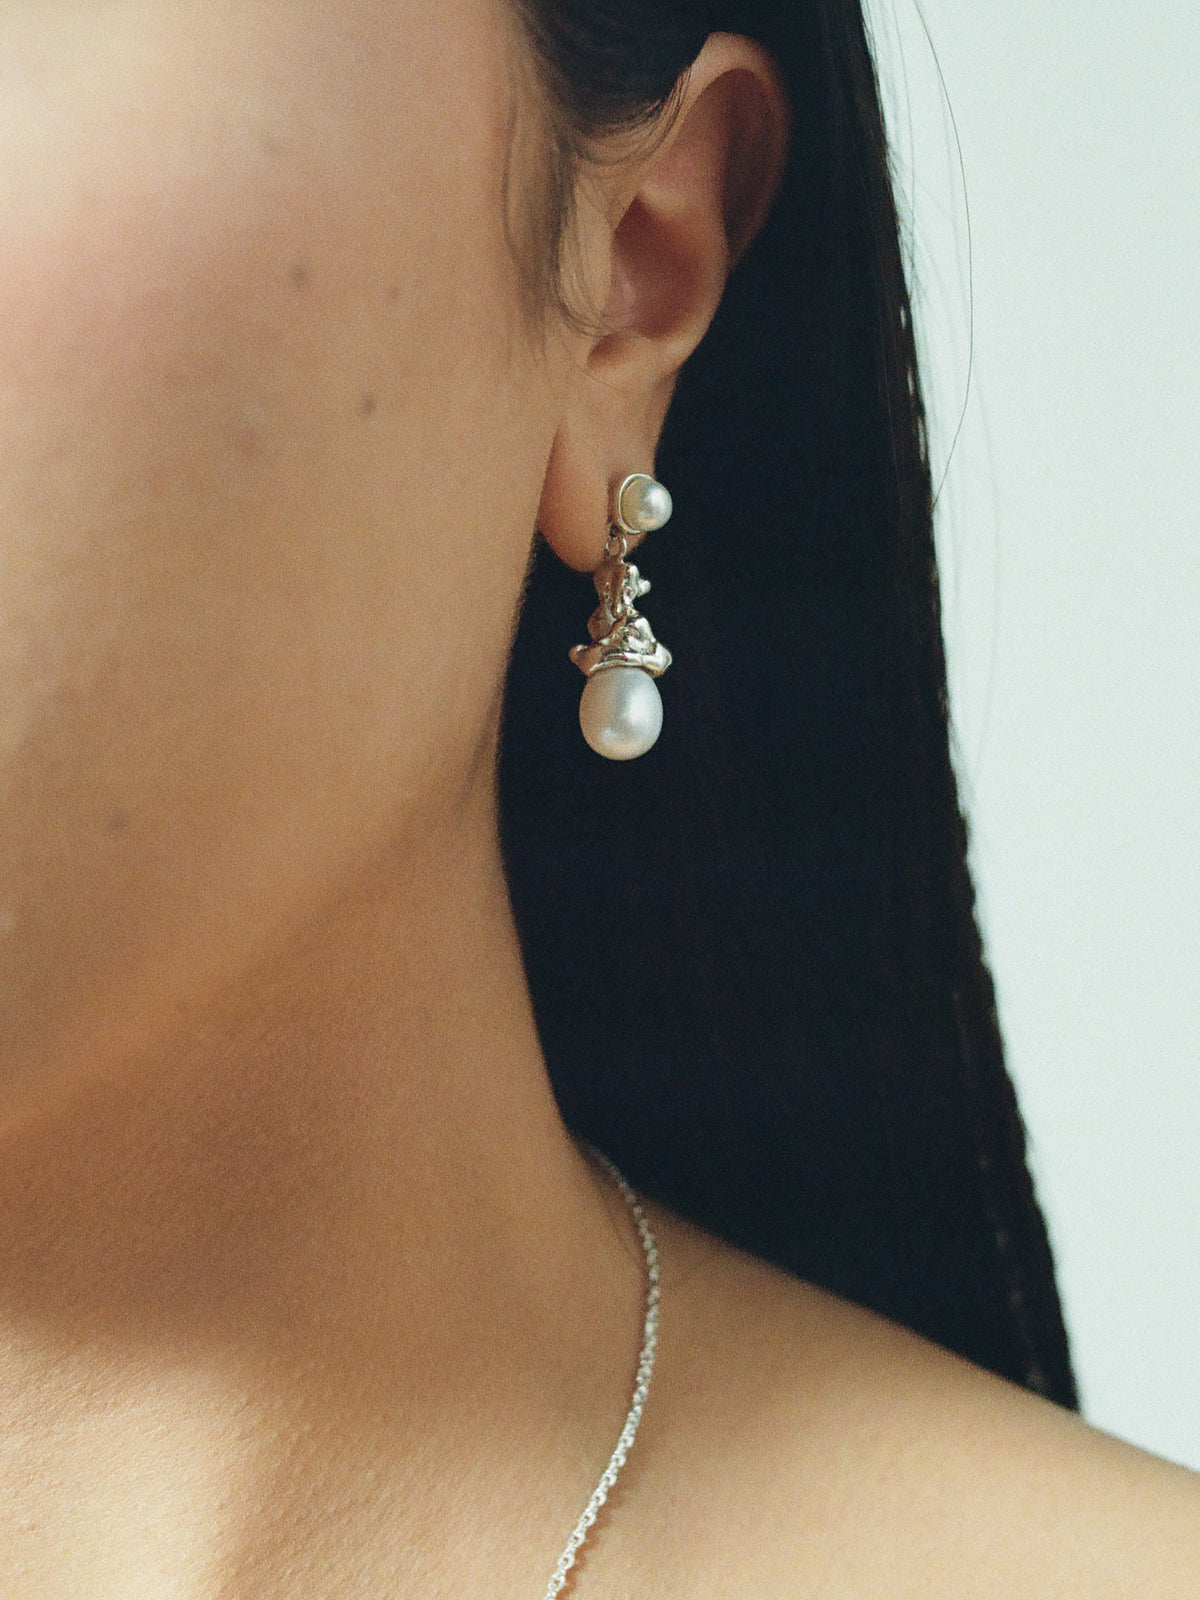 Close up image of FARIS SOPHIA Drops in sterling silver, shown on models left ear